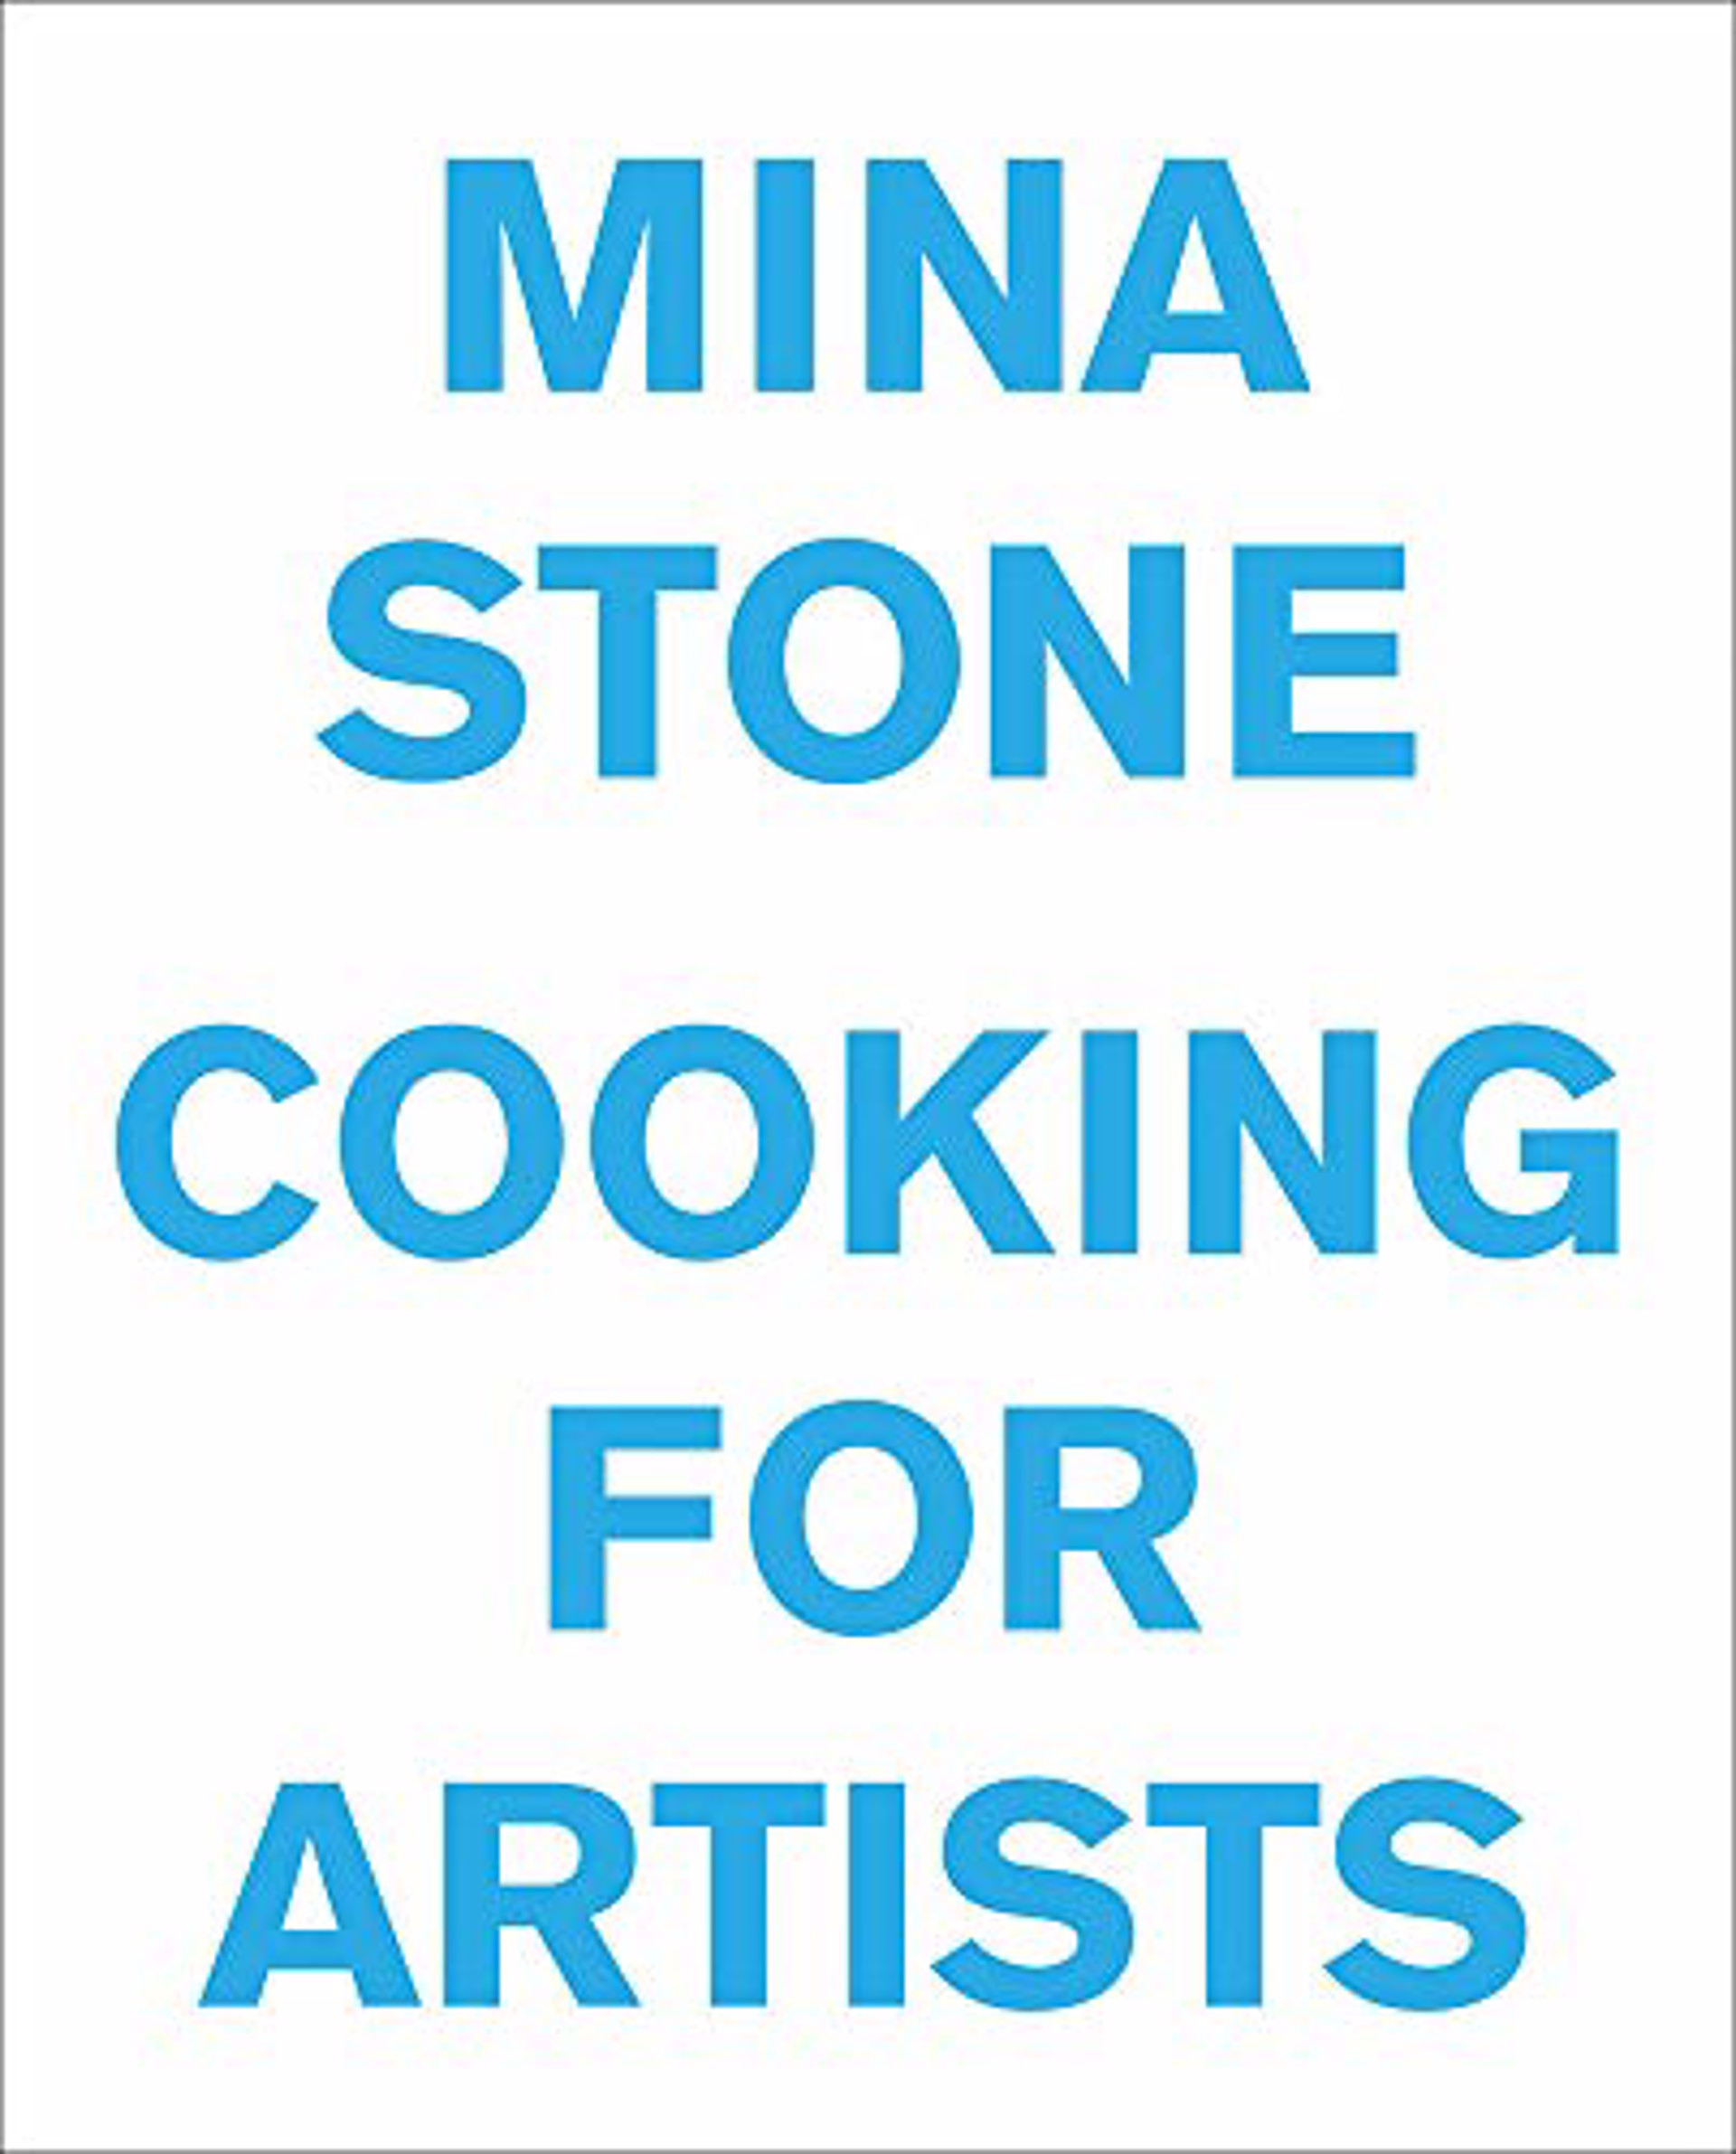 Mina Stone Cooking For Artists